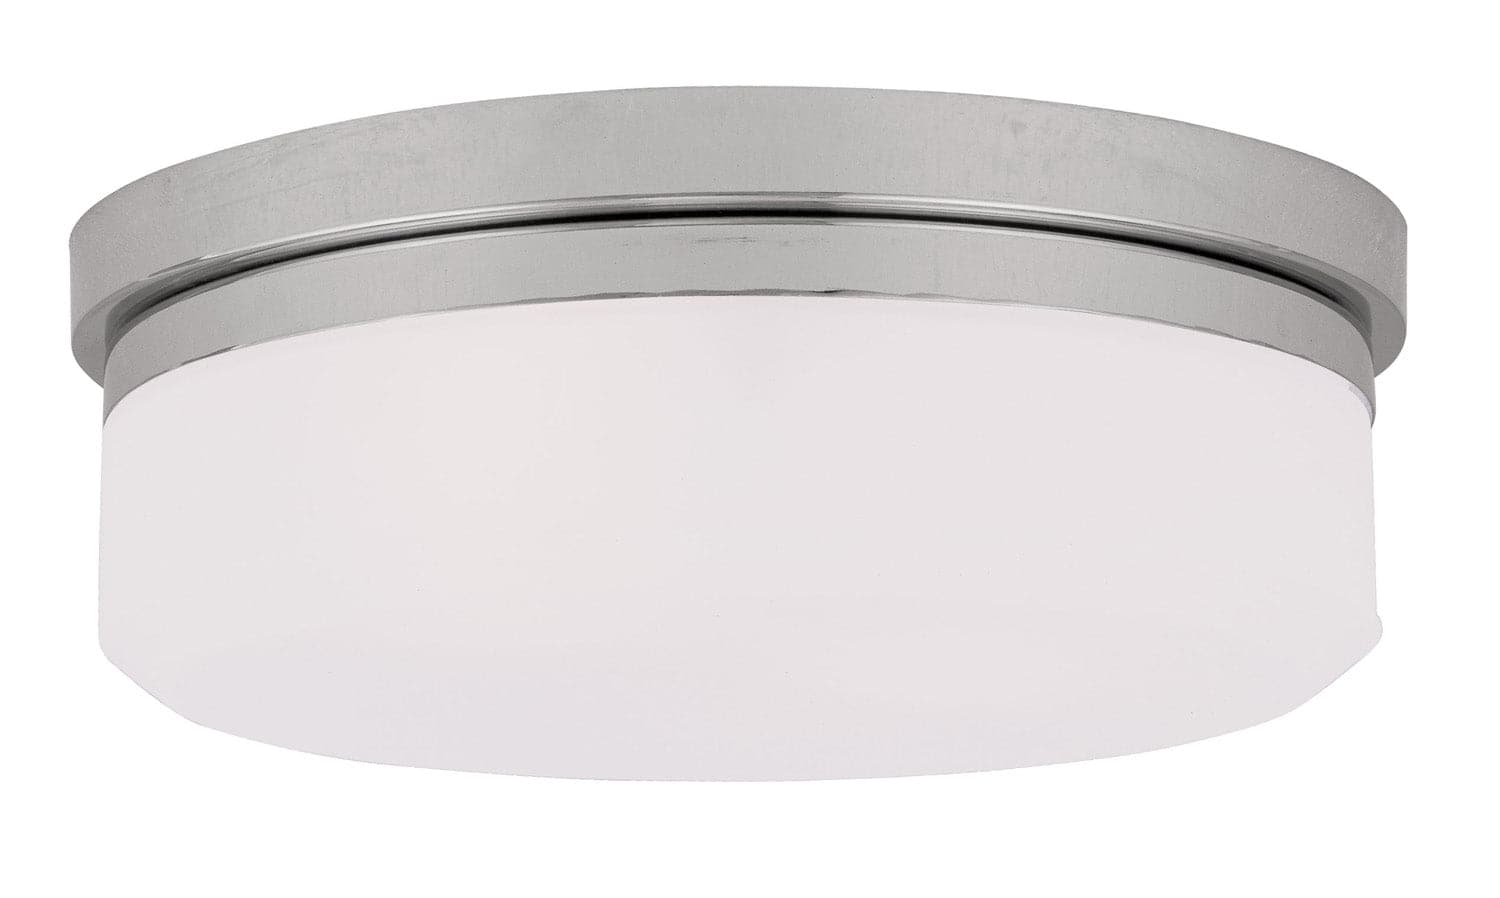 Livex Lighting - 7392-05 - Two Light Wall Sconce/Ceiling Mount - Stratus - Polished Chrome